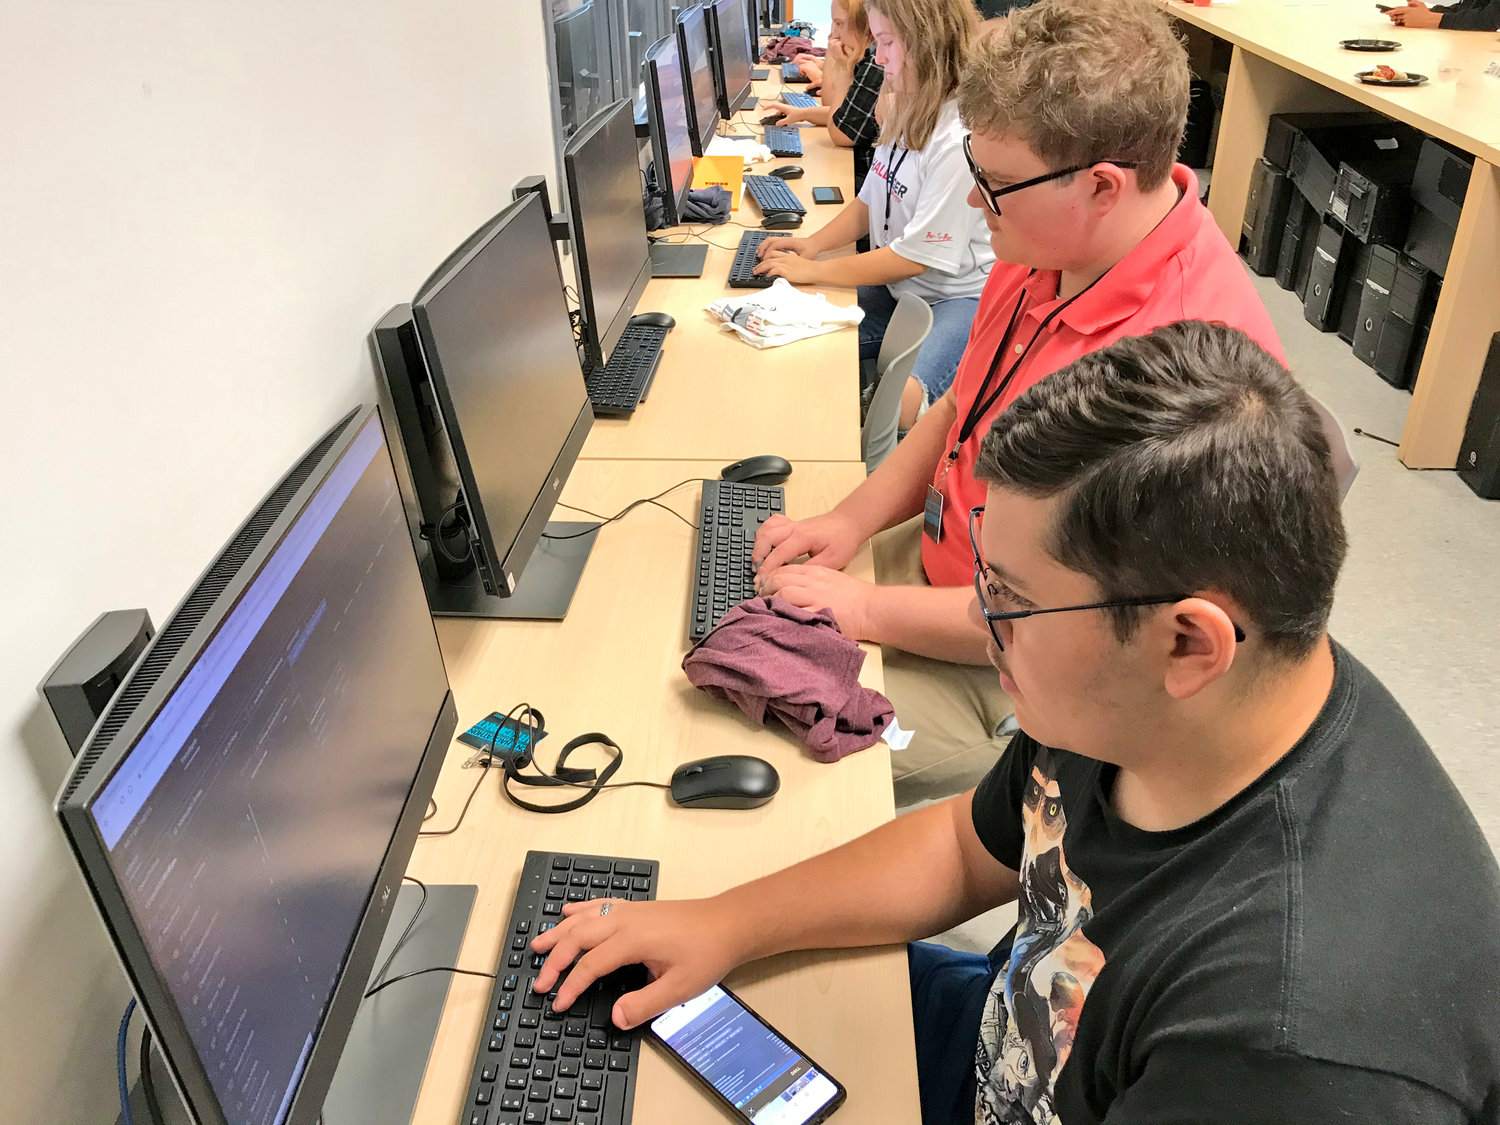 High school students, including Tylor Graf, front, and Michael Cannistra came out Saturday for the first time to join regional college students for the CNY Hackathon at Mohawk Valley Community College in Utica.